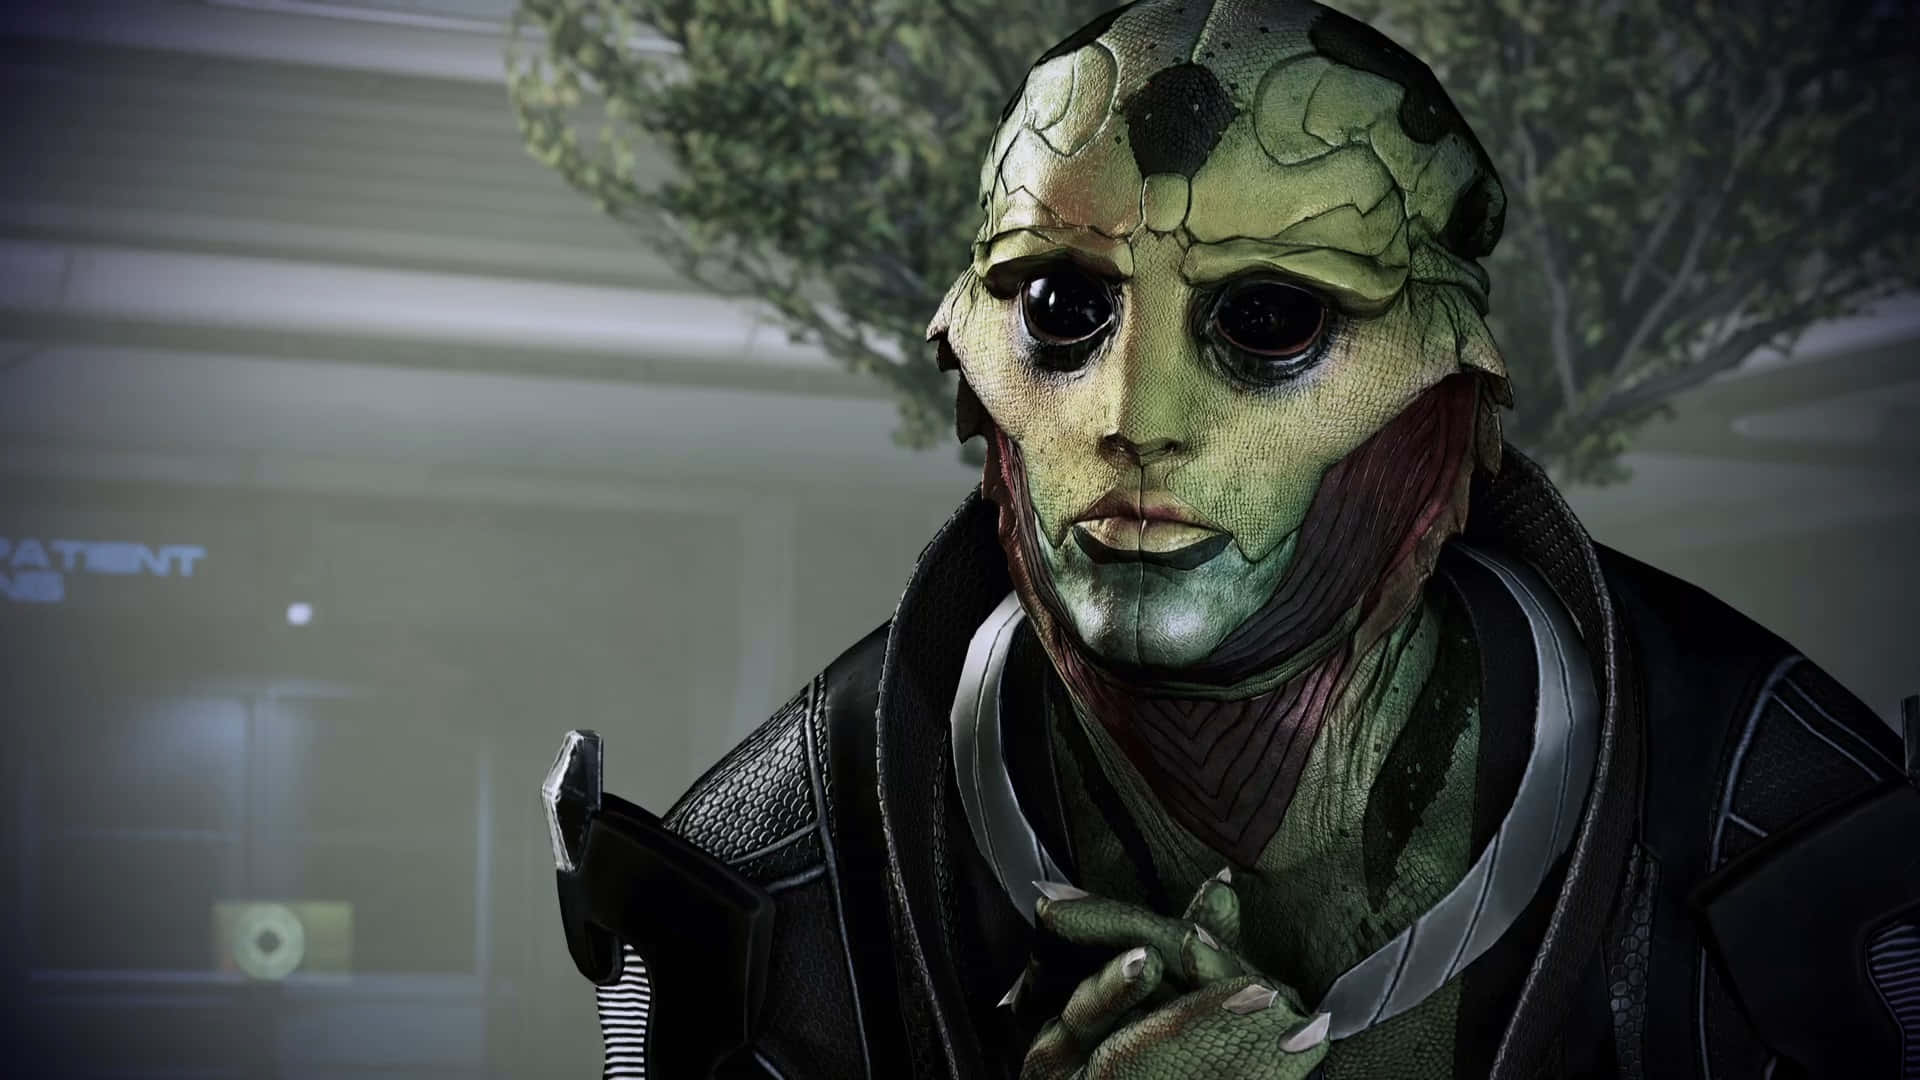 Thane Krios - Master Assassin and Team Member in Mass Effect 2 Wallpaper